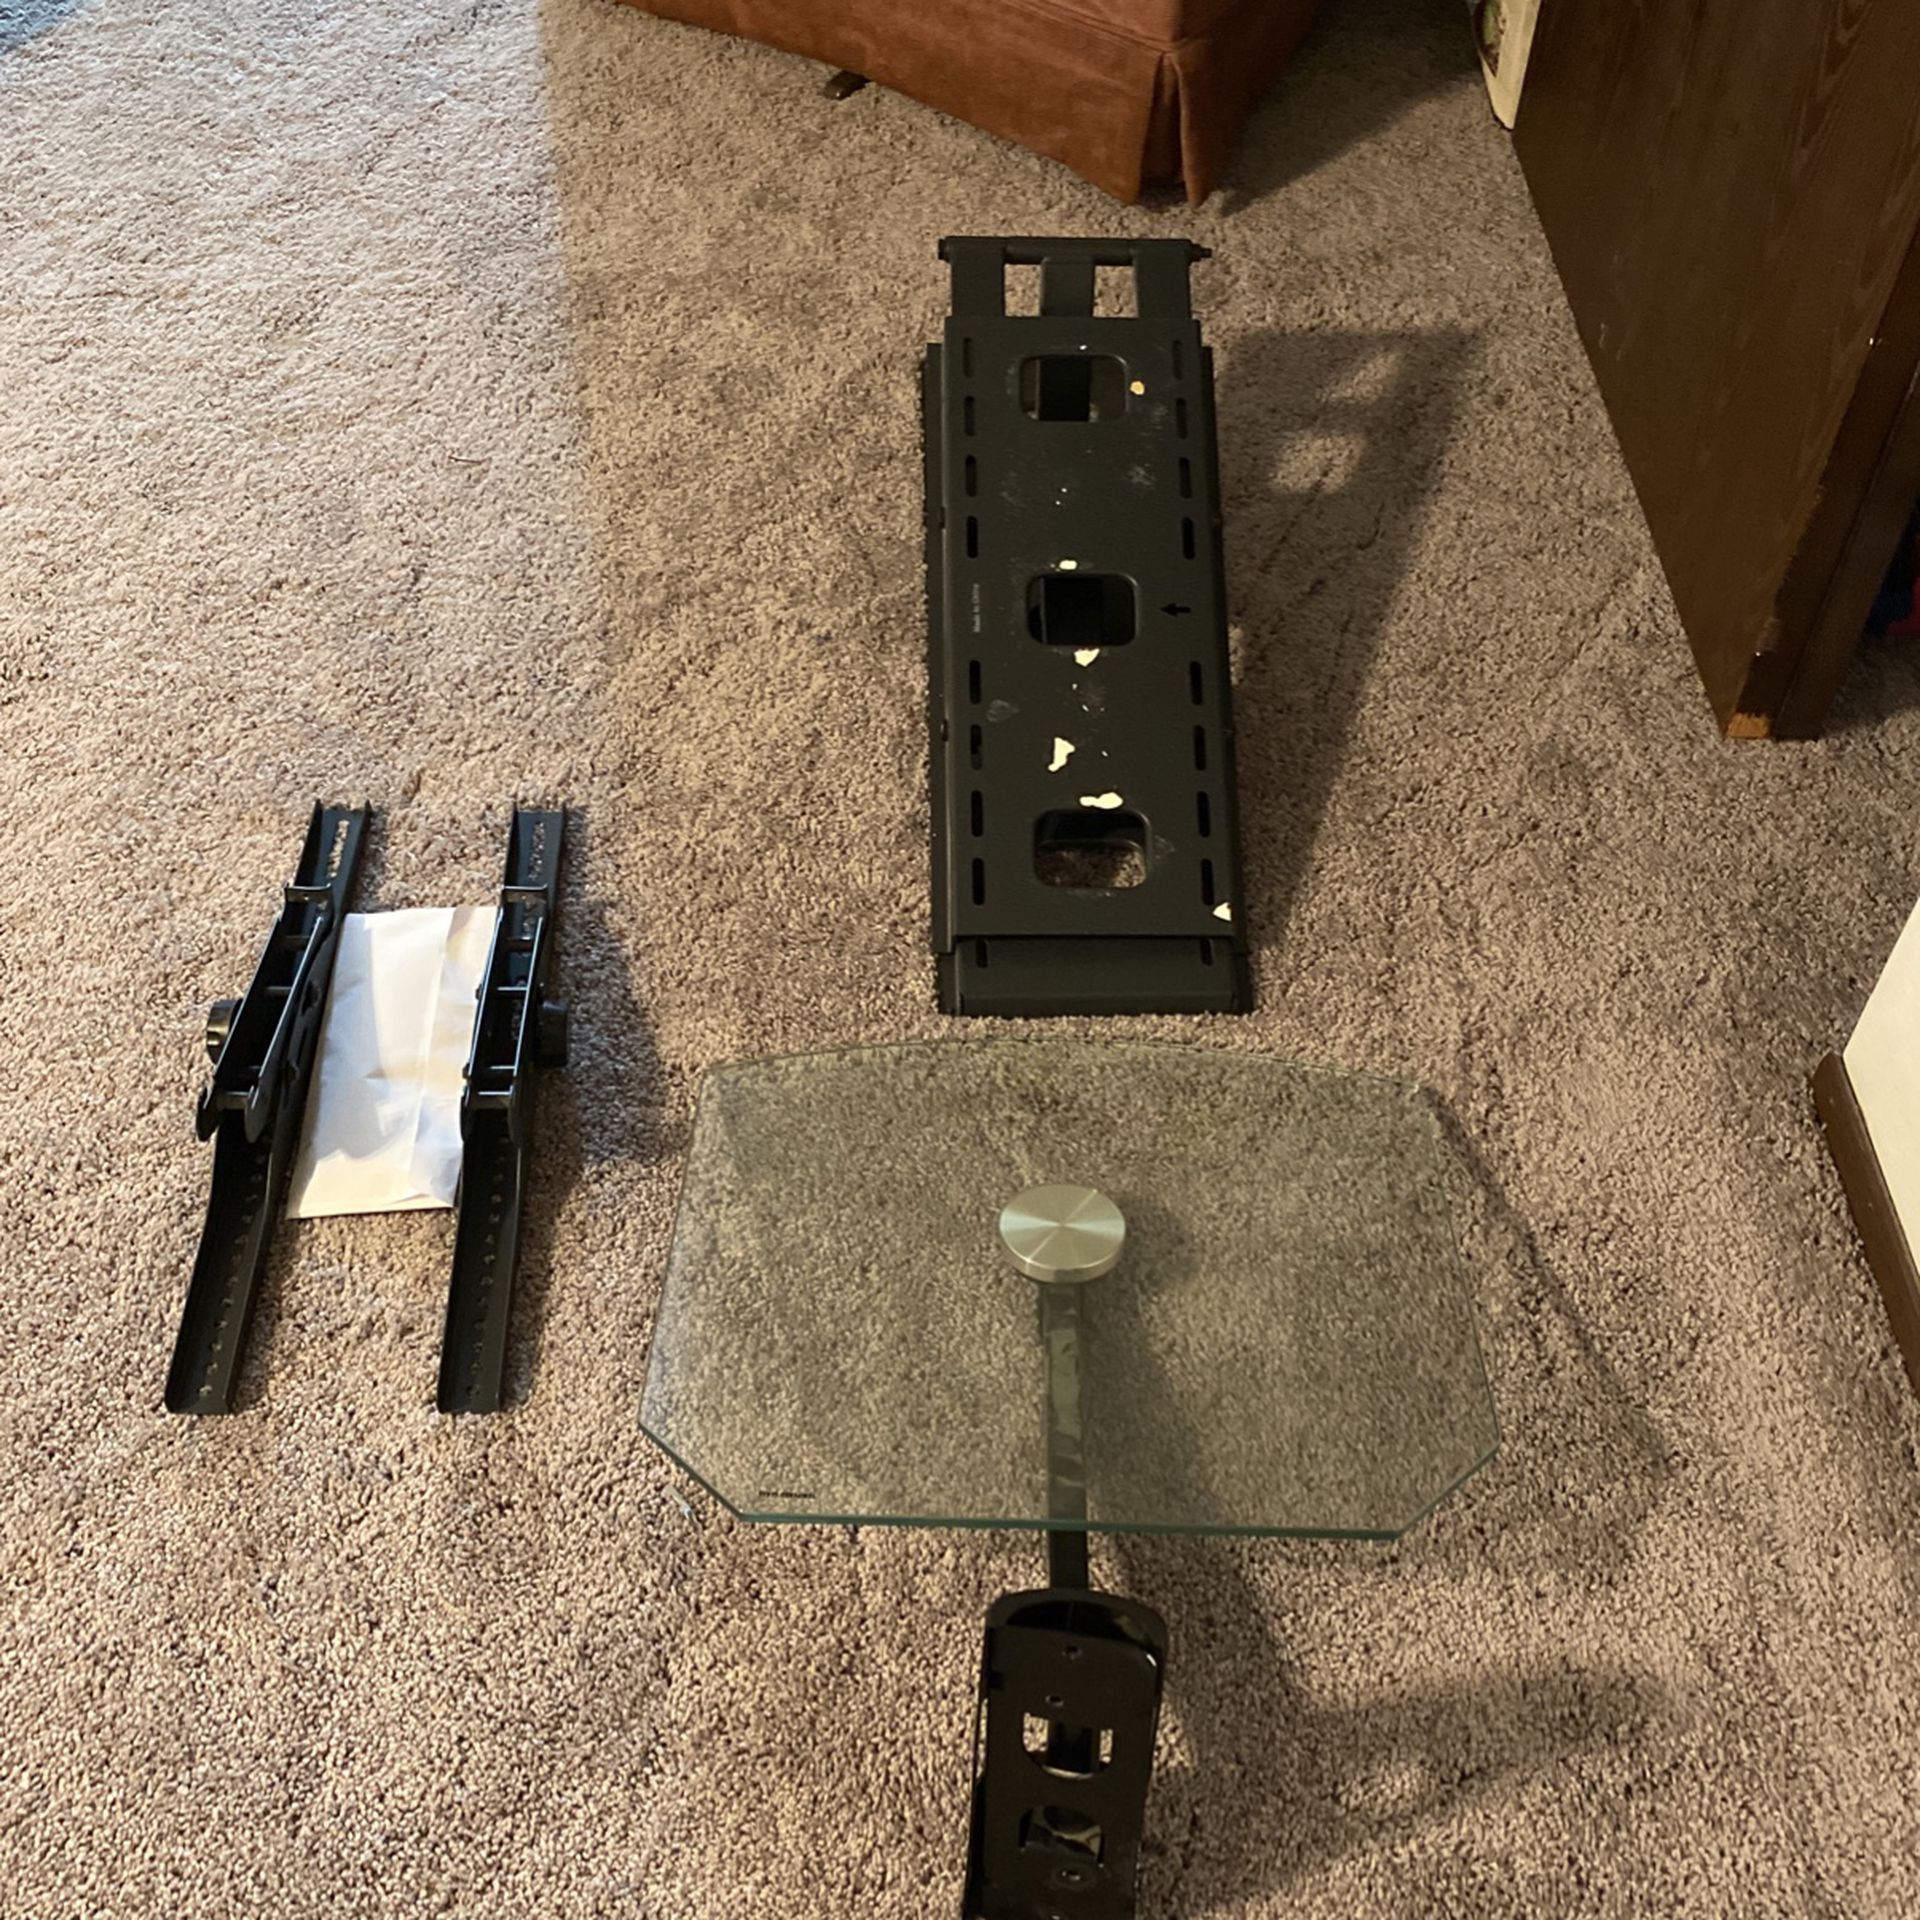 TV mount And shelf for under the TV